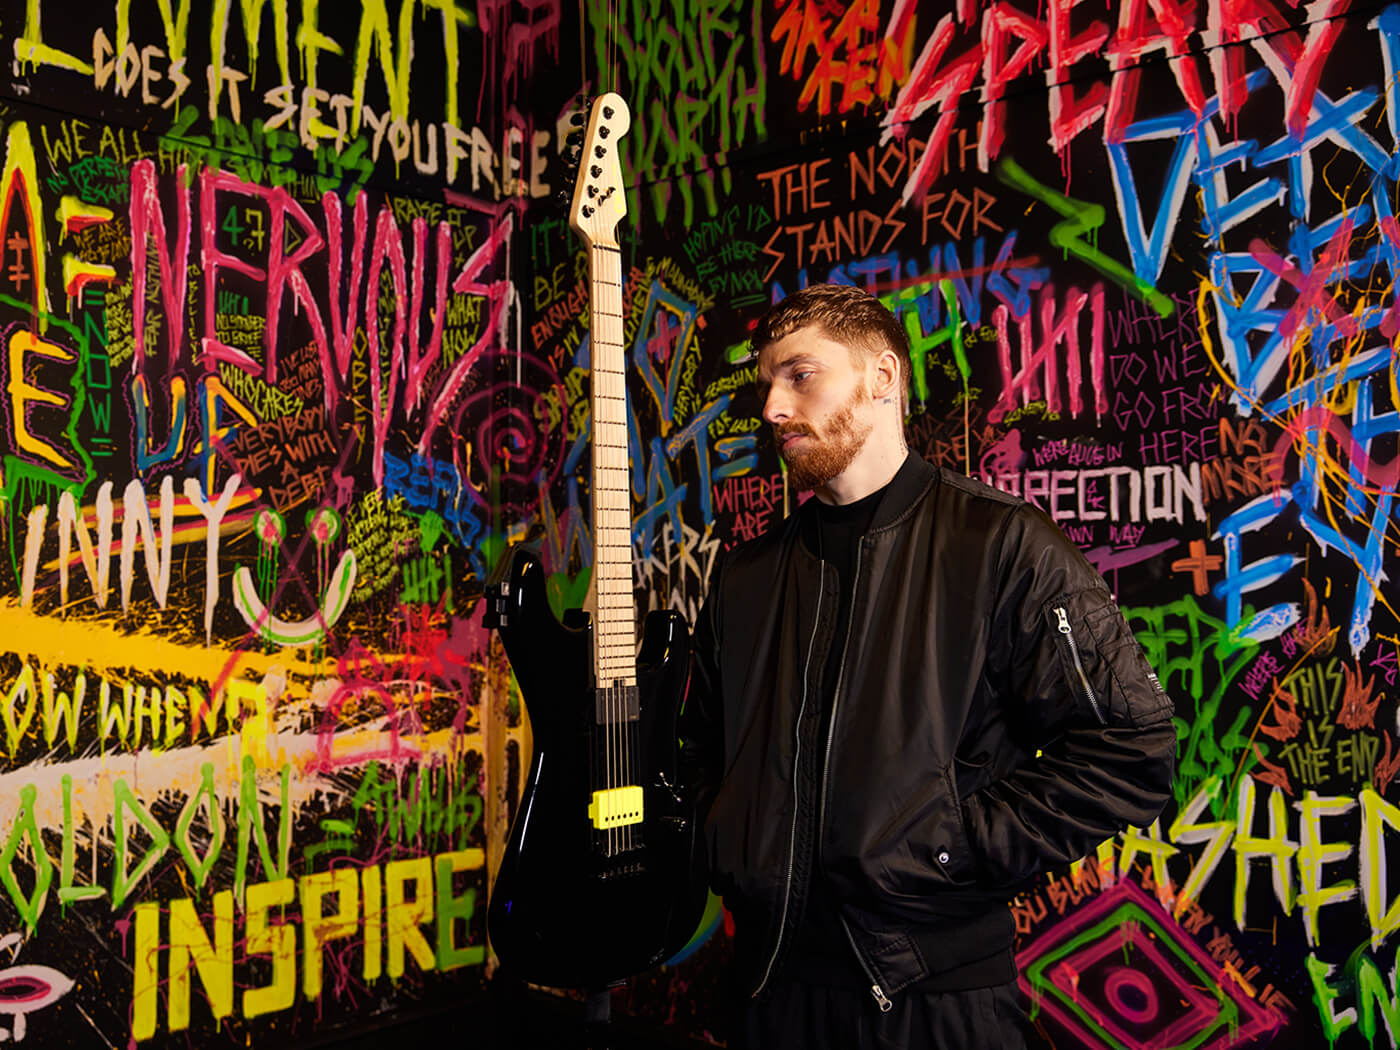 Sean Long with a guitar in a room filled with graffiti